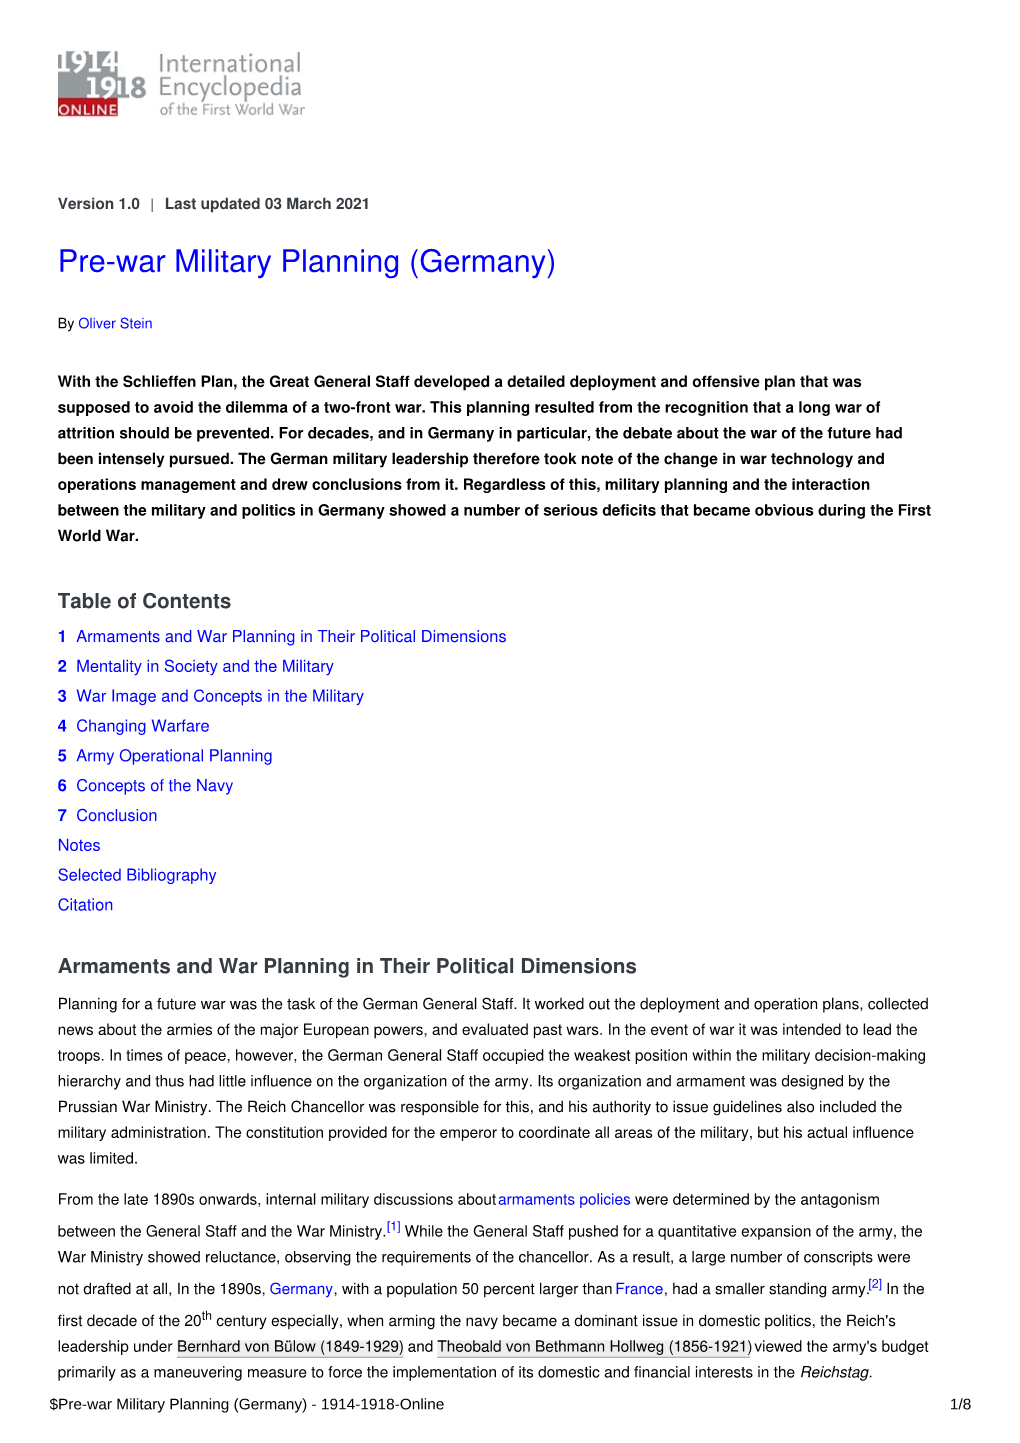 Pre-War Military Planning (Germany) | International Encyclopedia of The